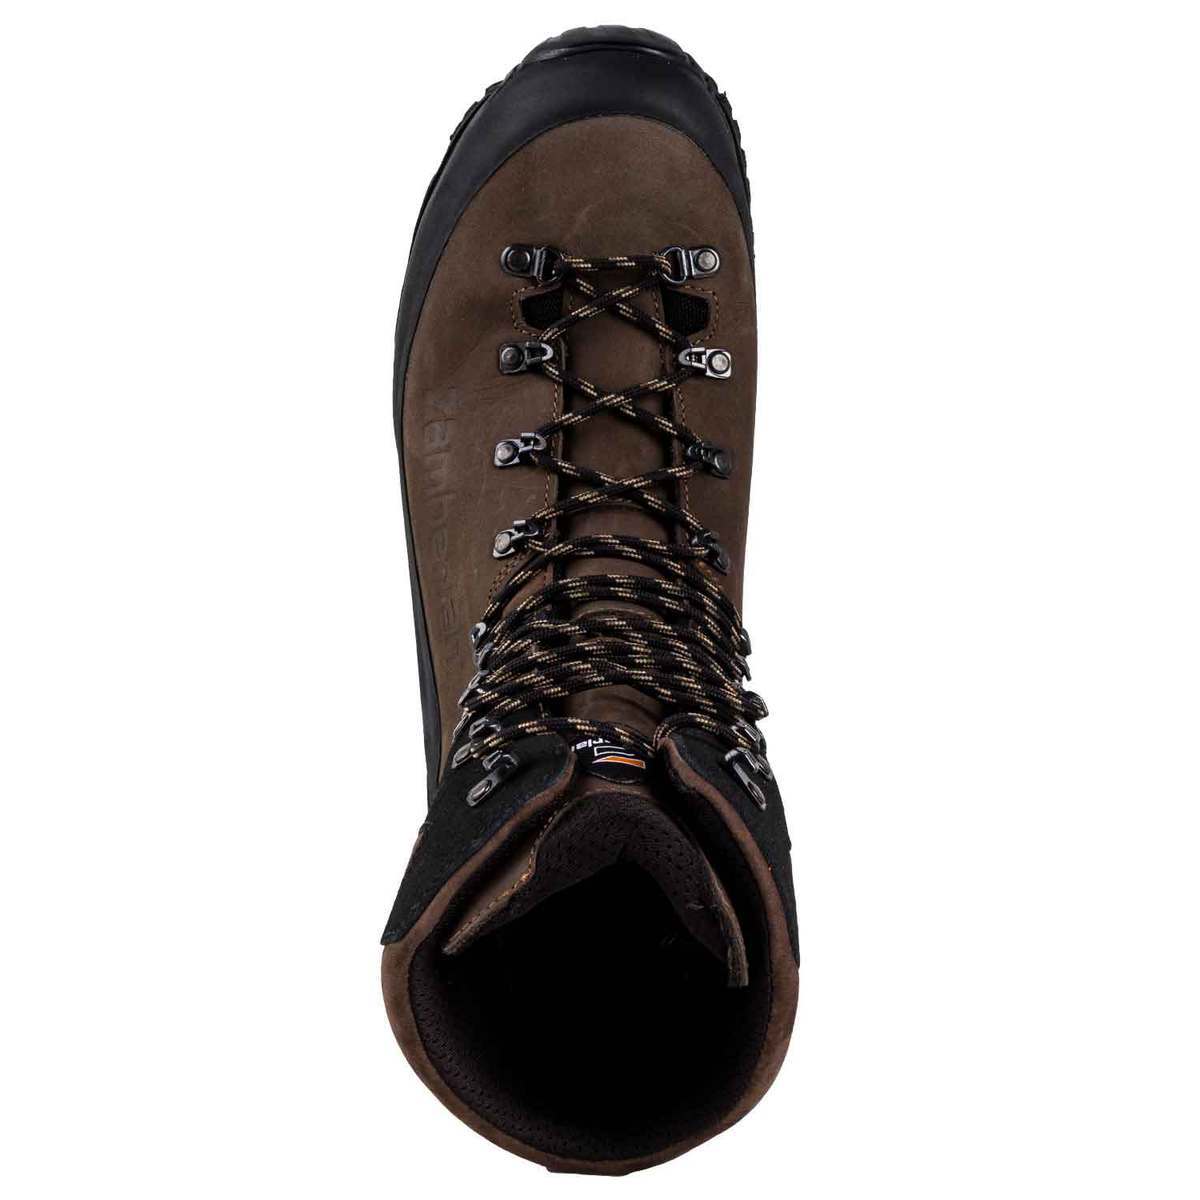 Zamberlan Men's 981 Wasatch GORE-TEX RR Hunting Boots - Brown - Size 9.